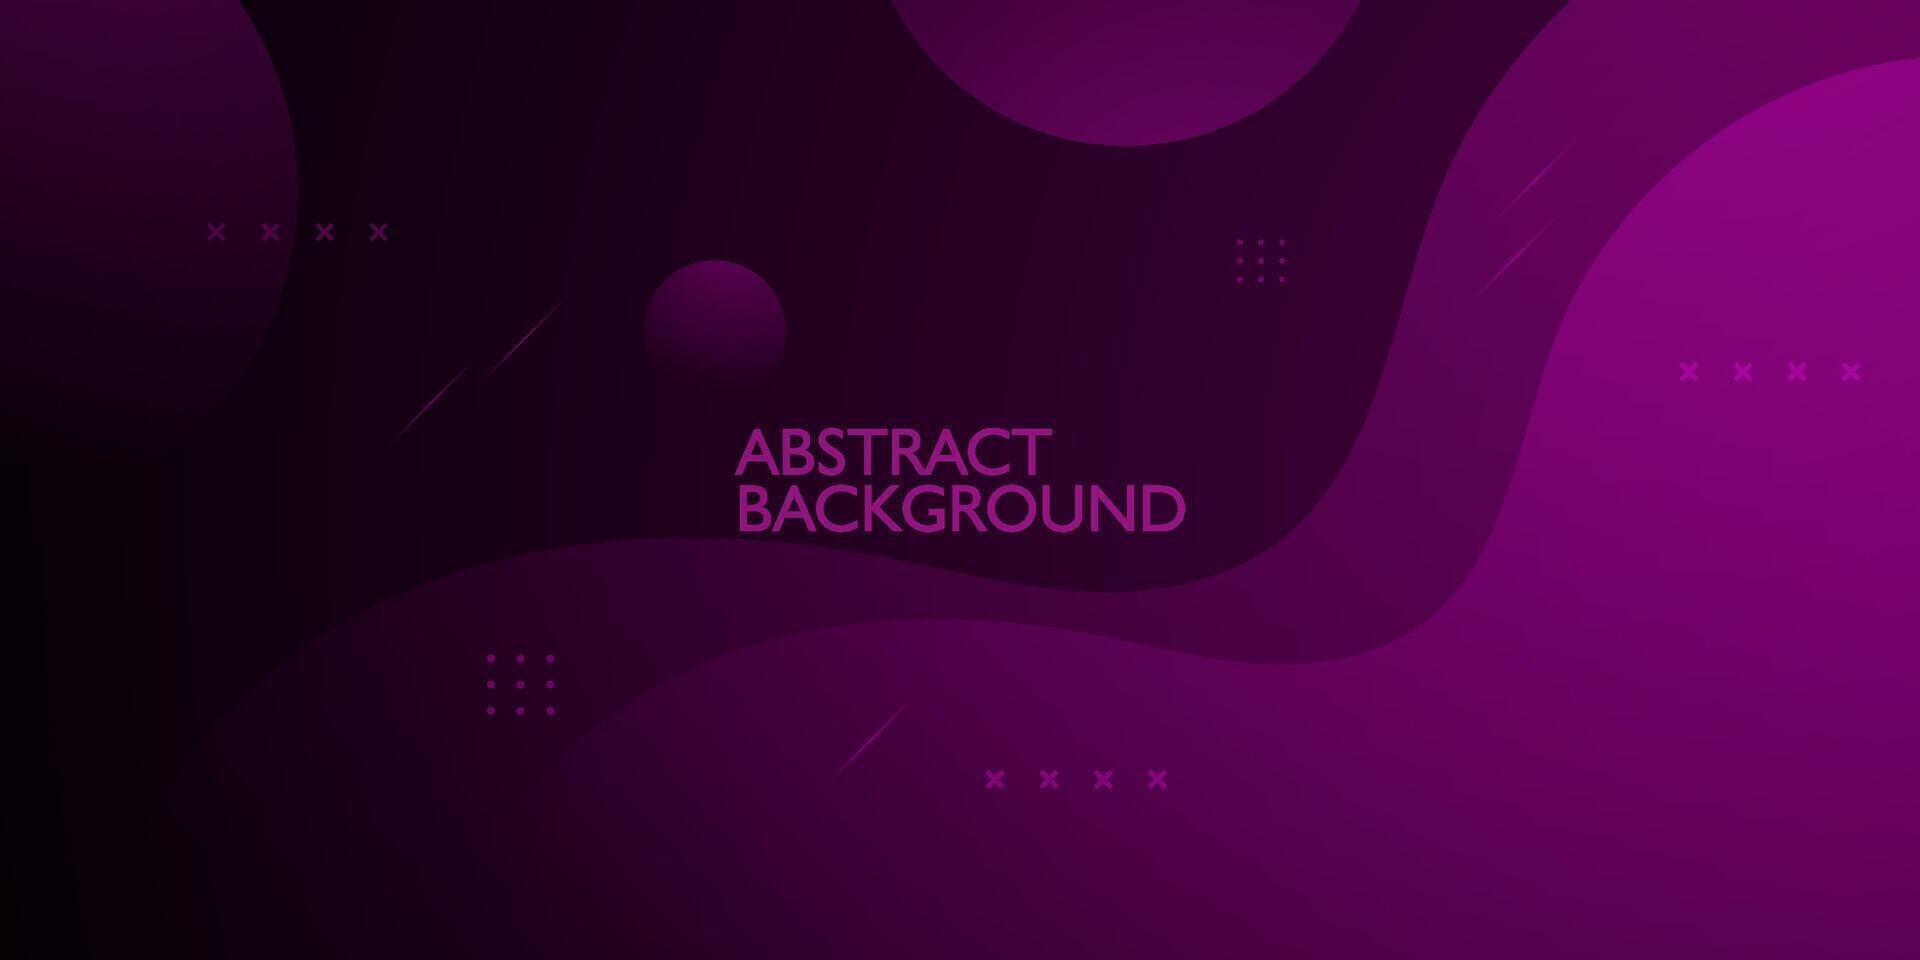 Dark purple geometric background. Wave color background with circle pattern design. Fluid shapes composition. Eps10 vector